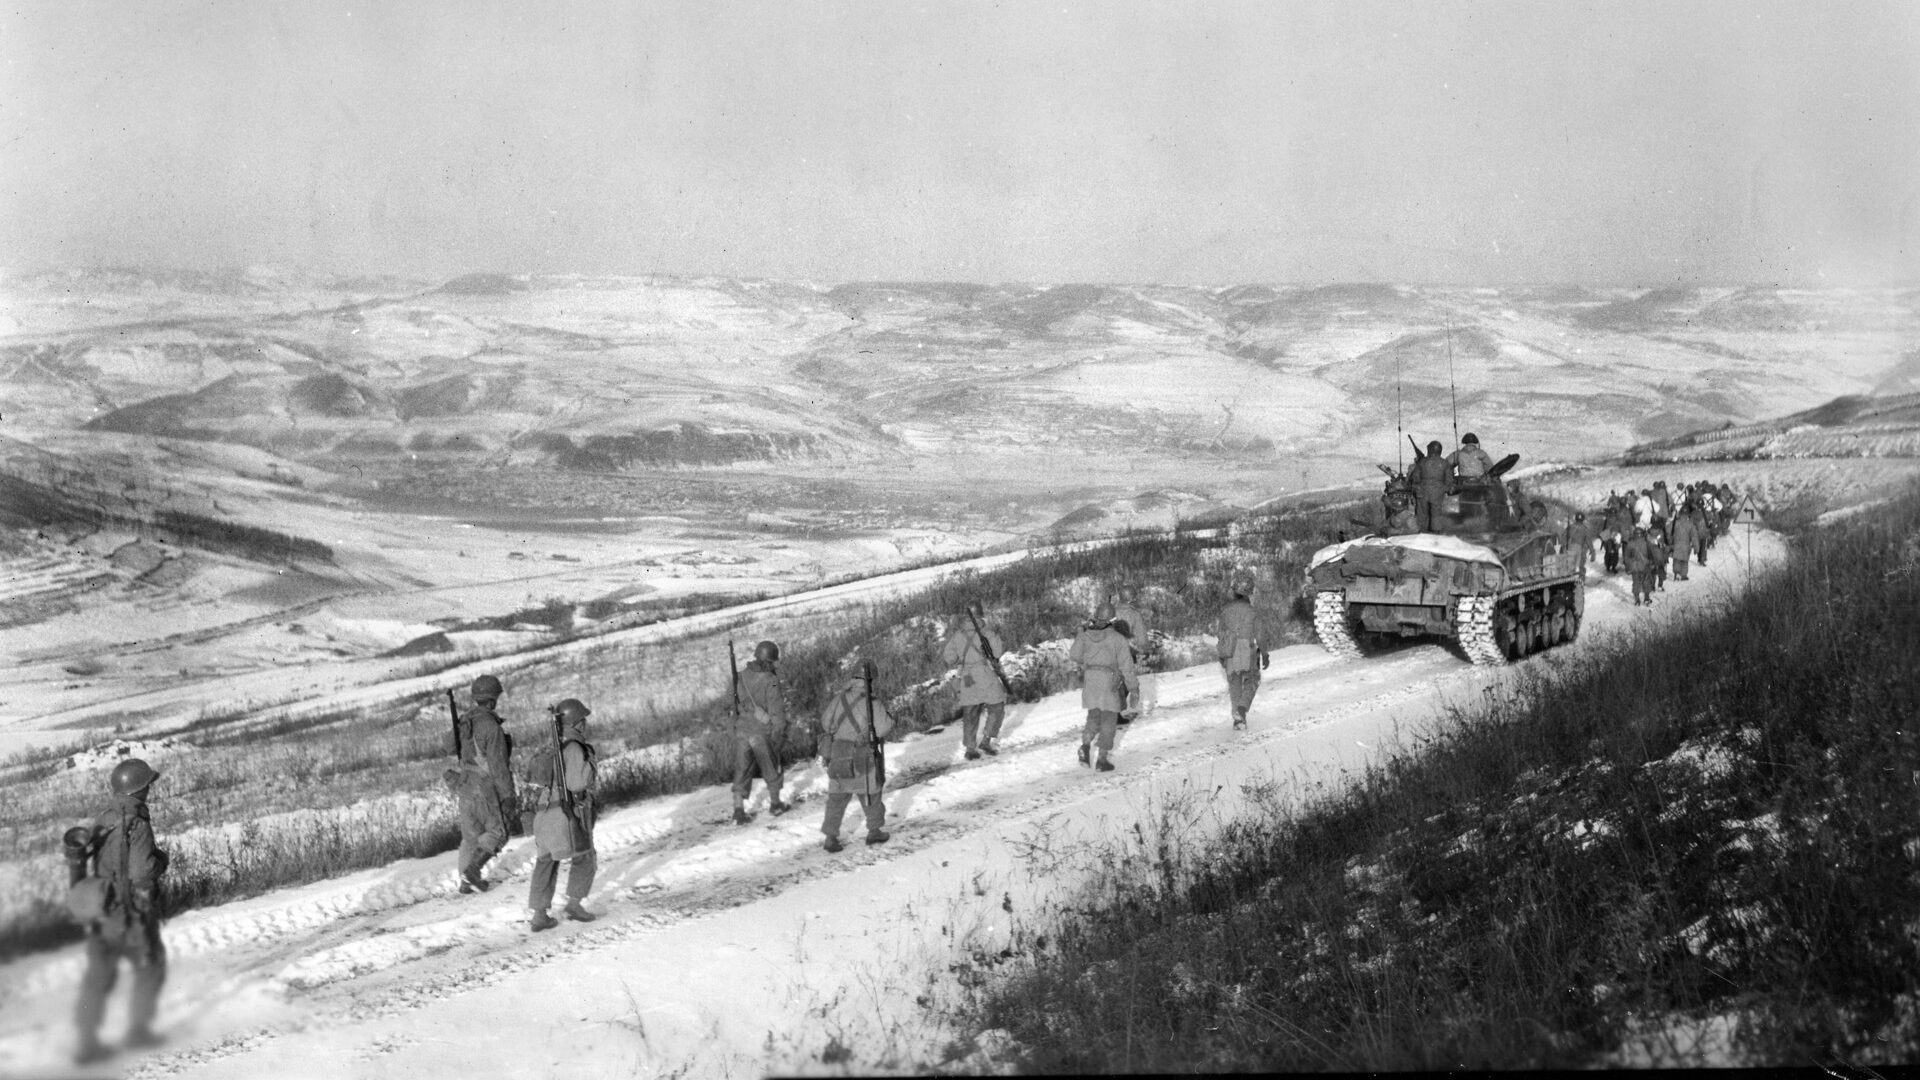 A column of the U.S. Army 7th Infantry Division snakes its way through mountainous terrain of North Korea on November 21, 1950. A regiment-sized force of the division was assigned to guard the 1st Marine Division’s right flank at the Chosin Reservoir.